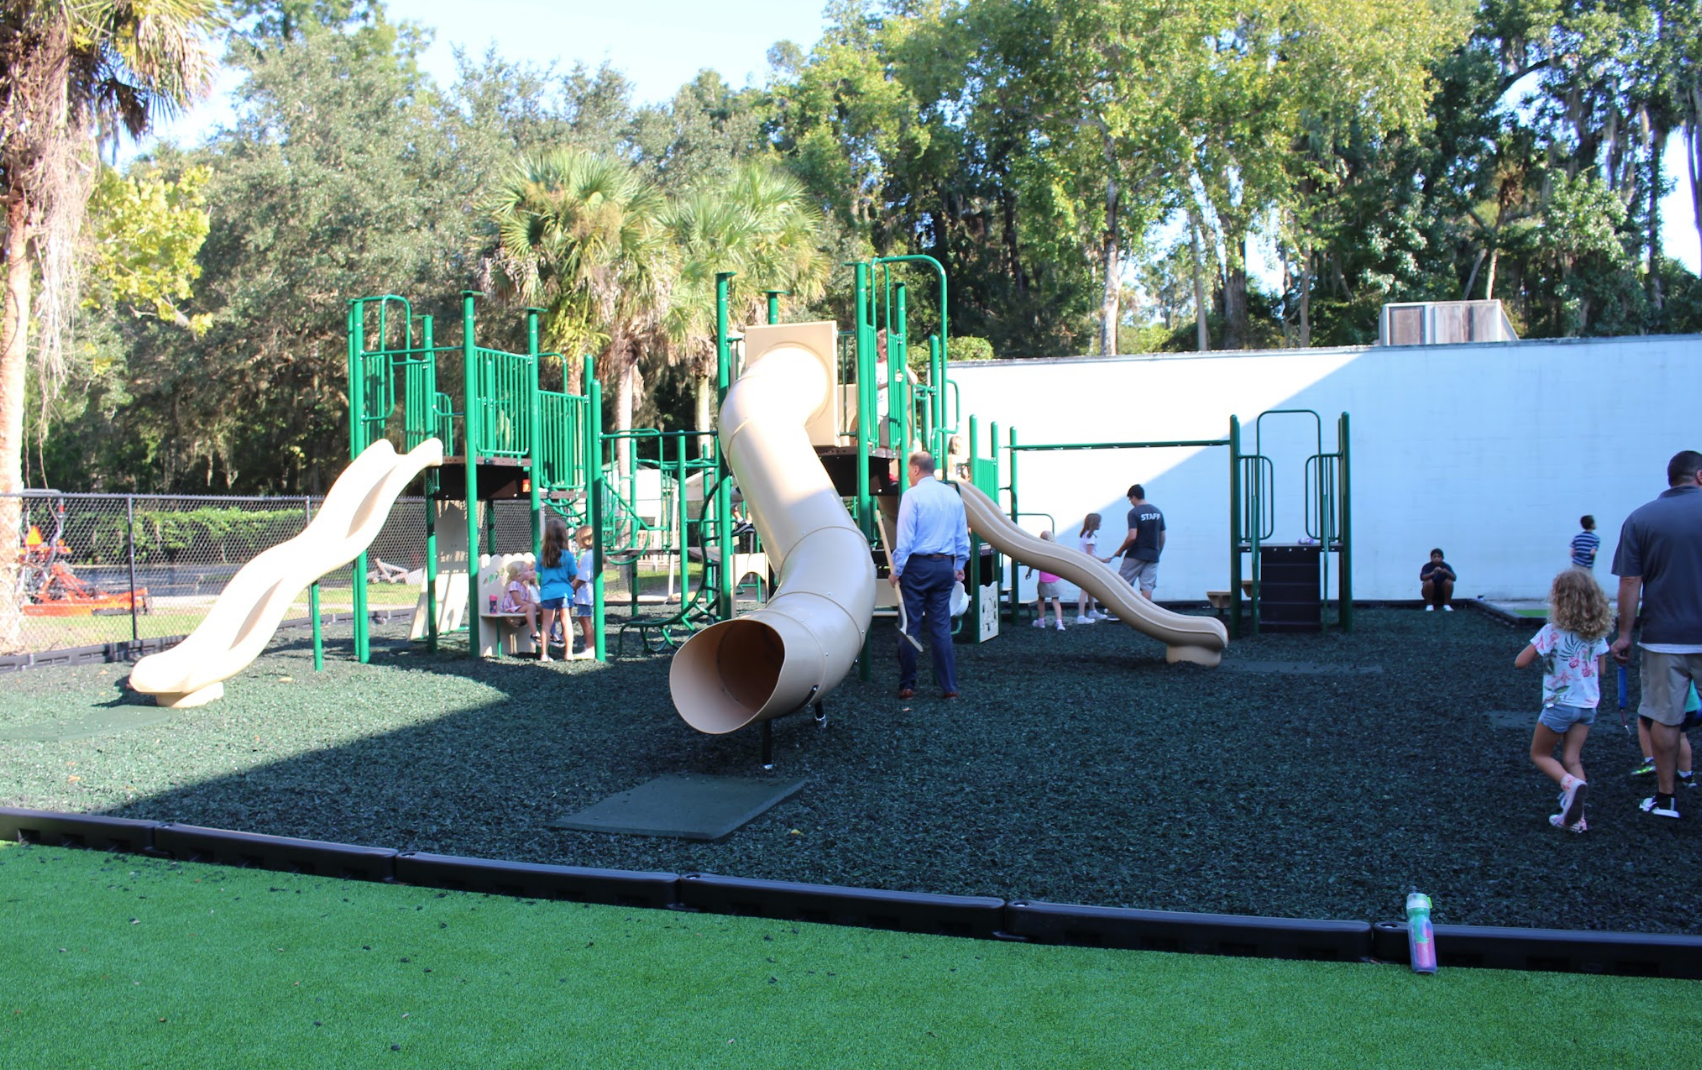 One of the playgrounds now open at the Ormond Beach YMCA. Courtesy photo